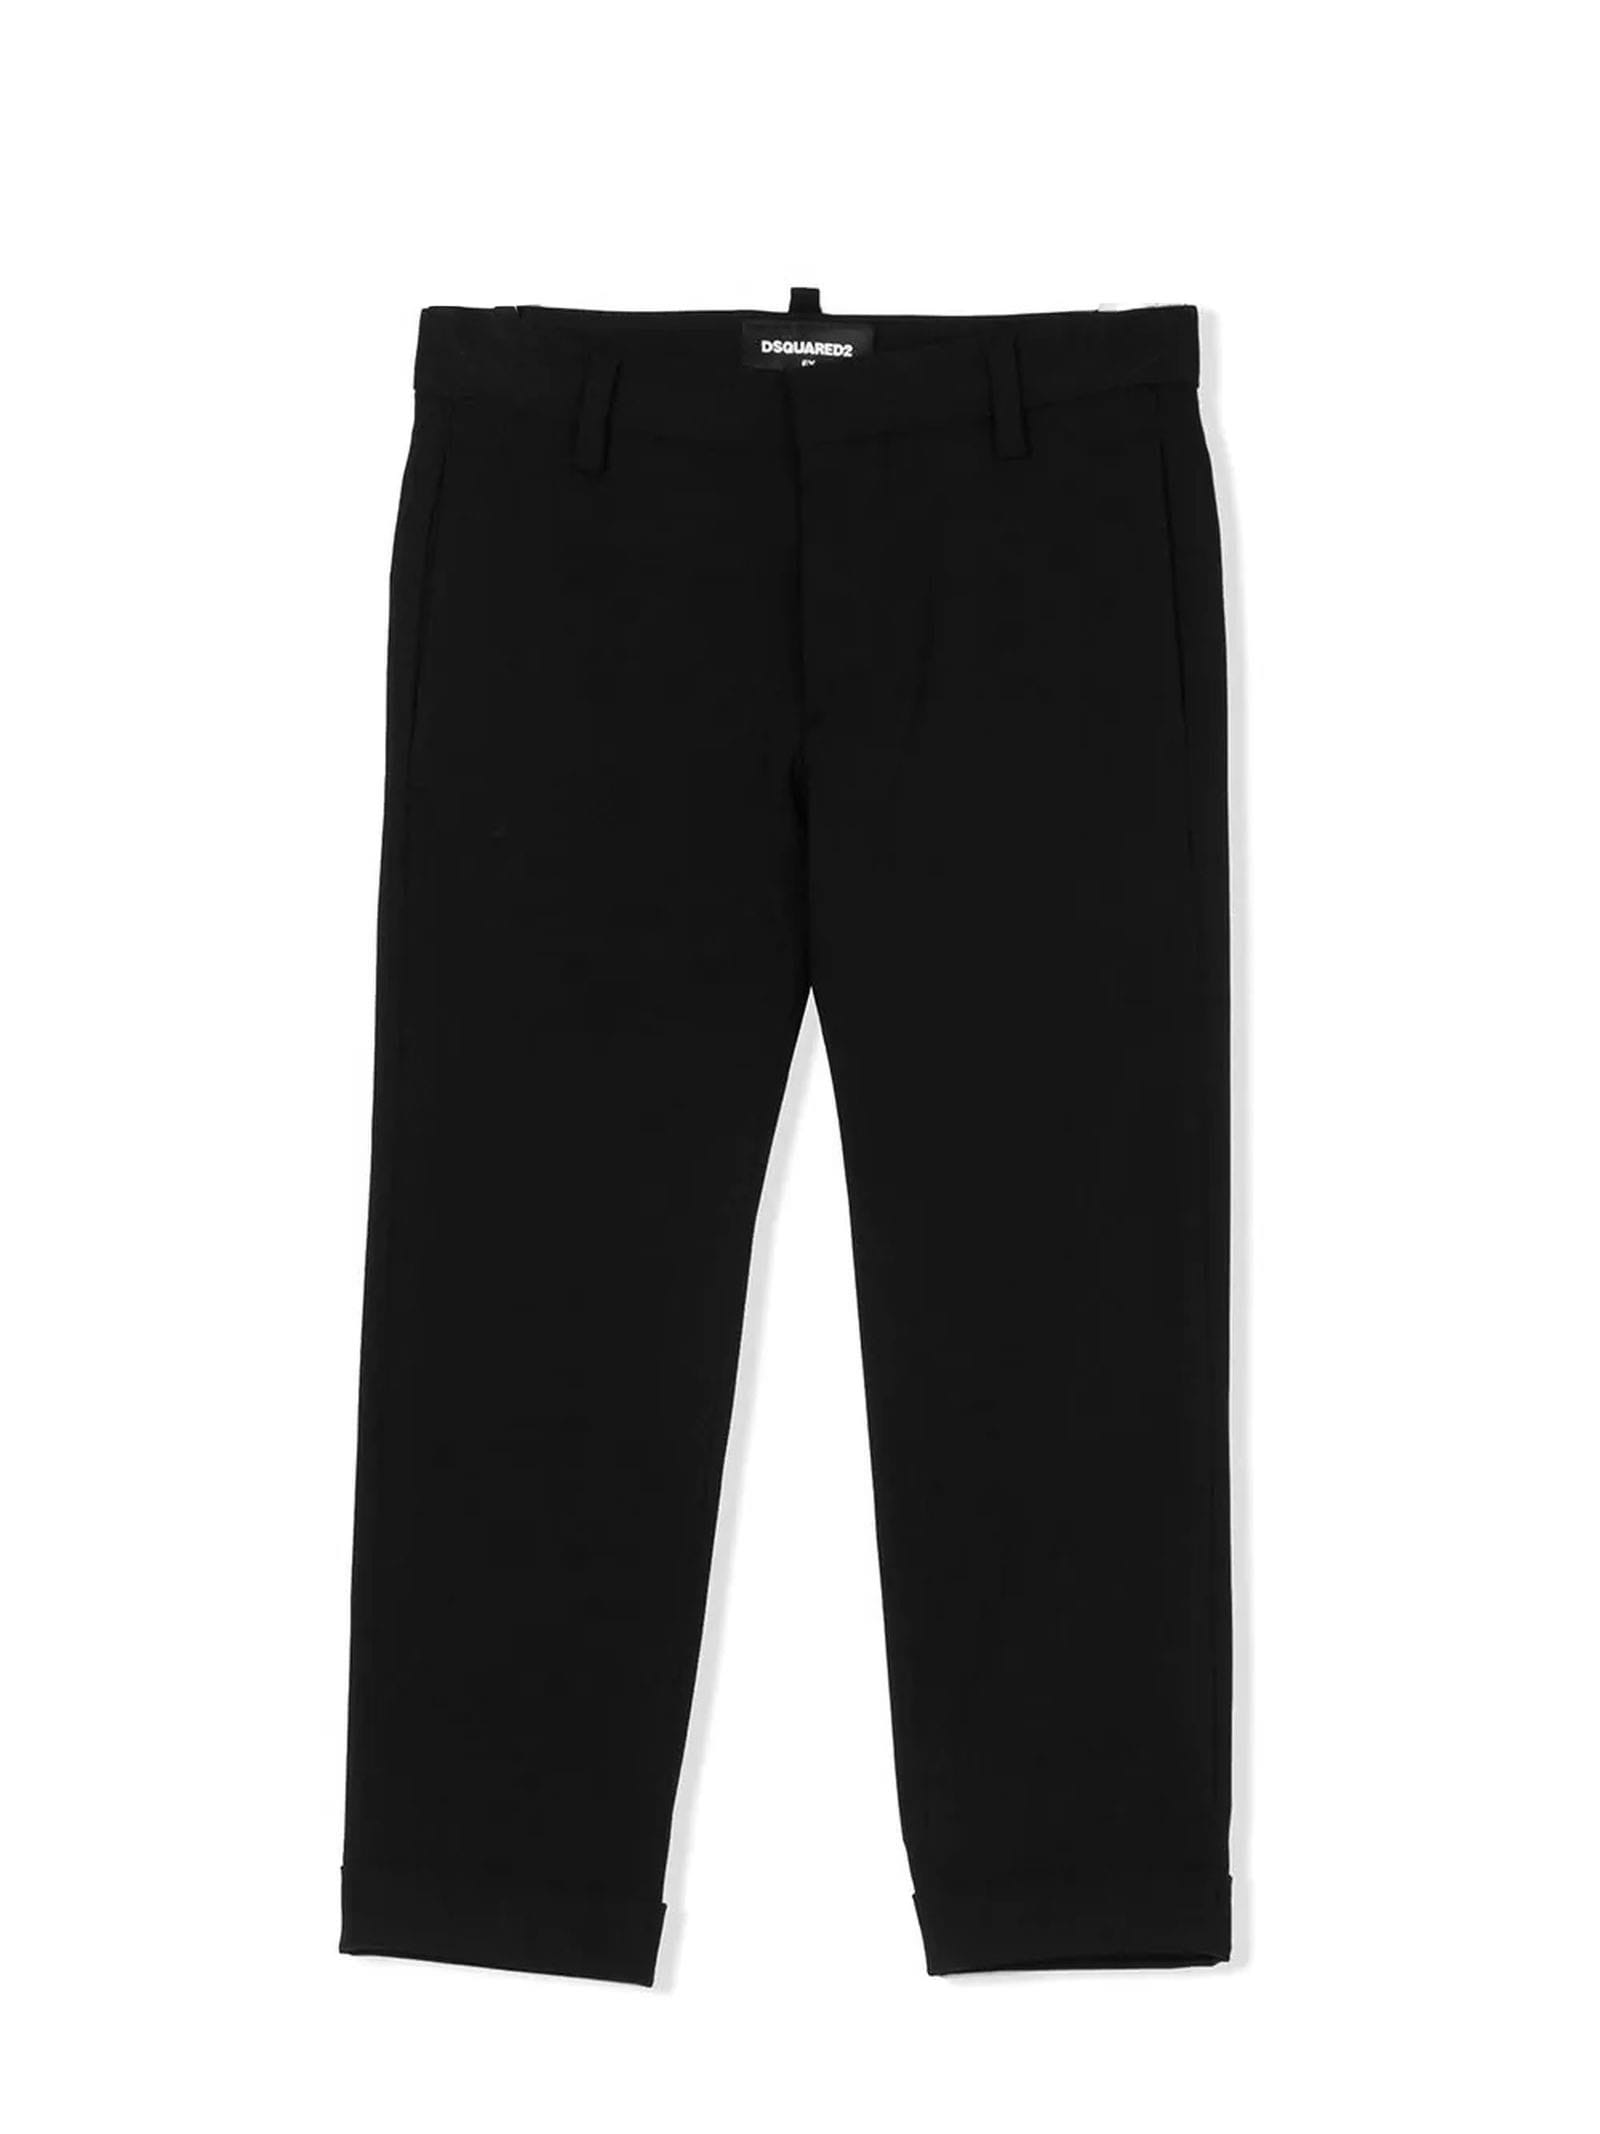 Dsquared2 Black Stretch Virgin Wool Trousers